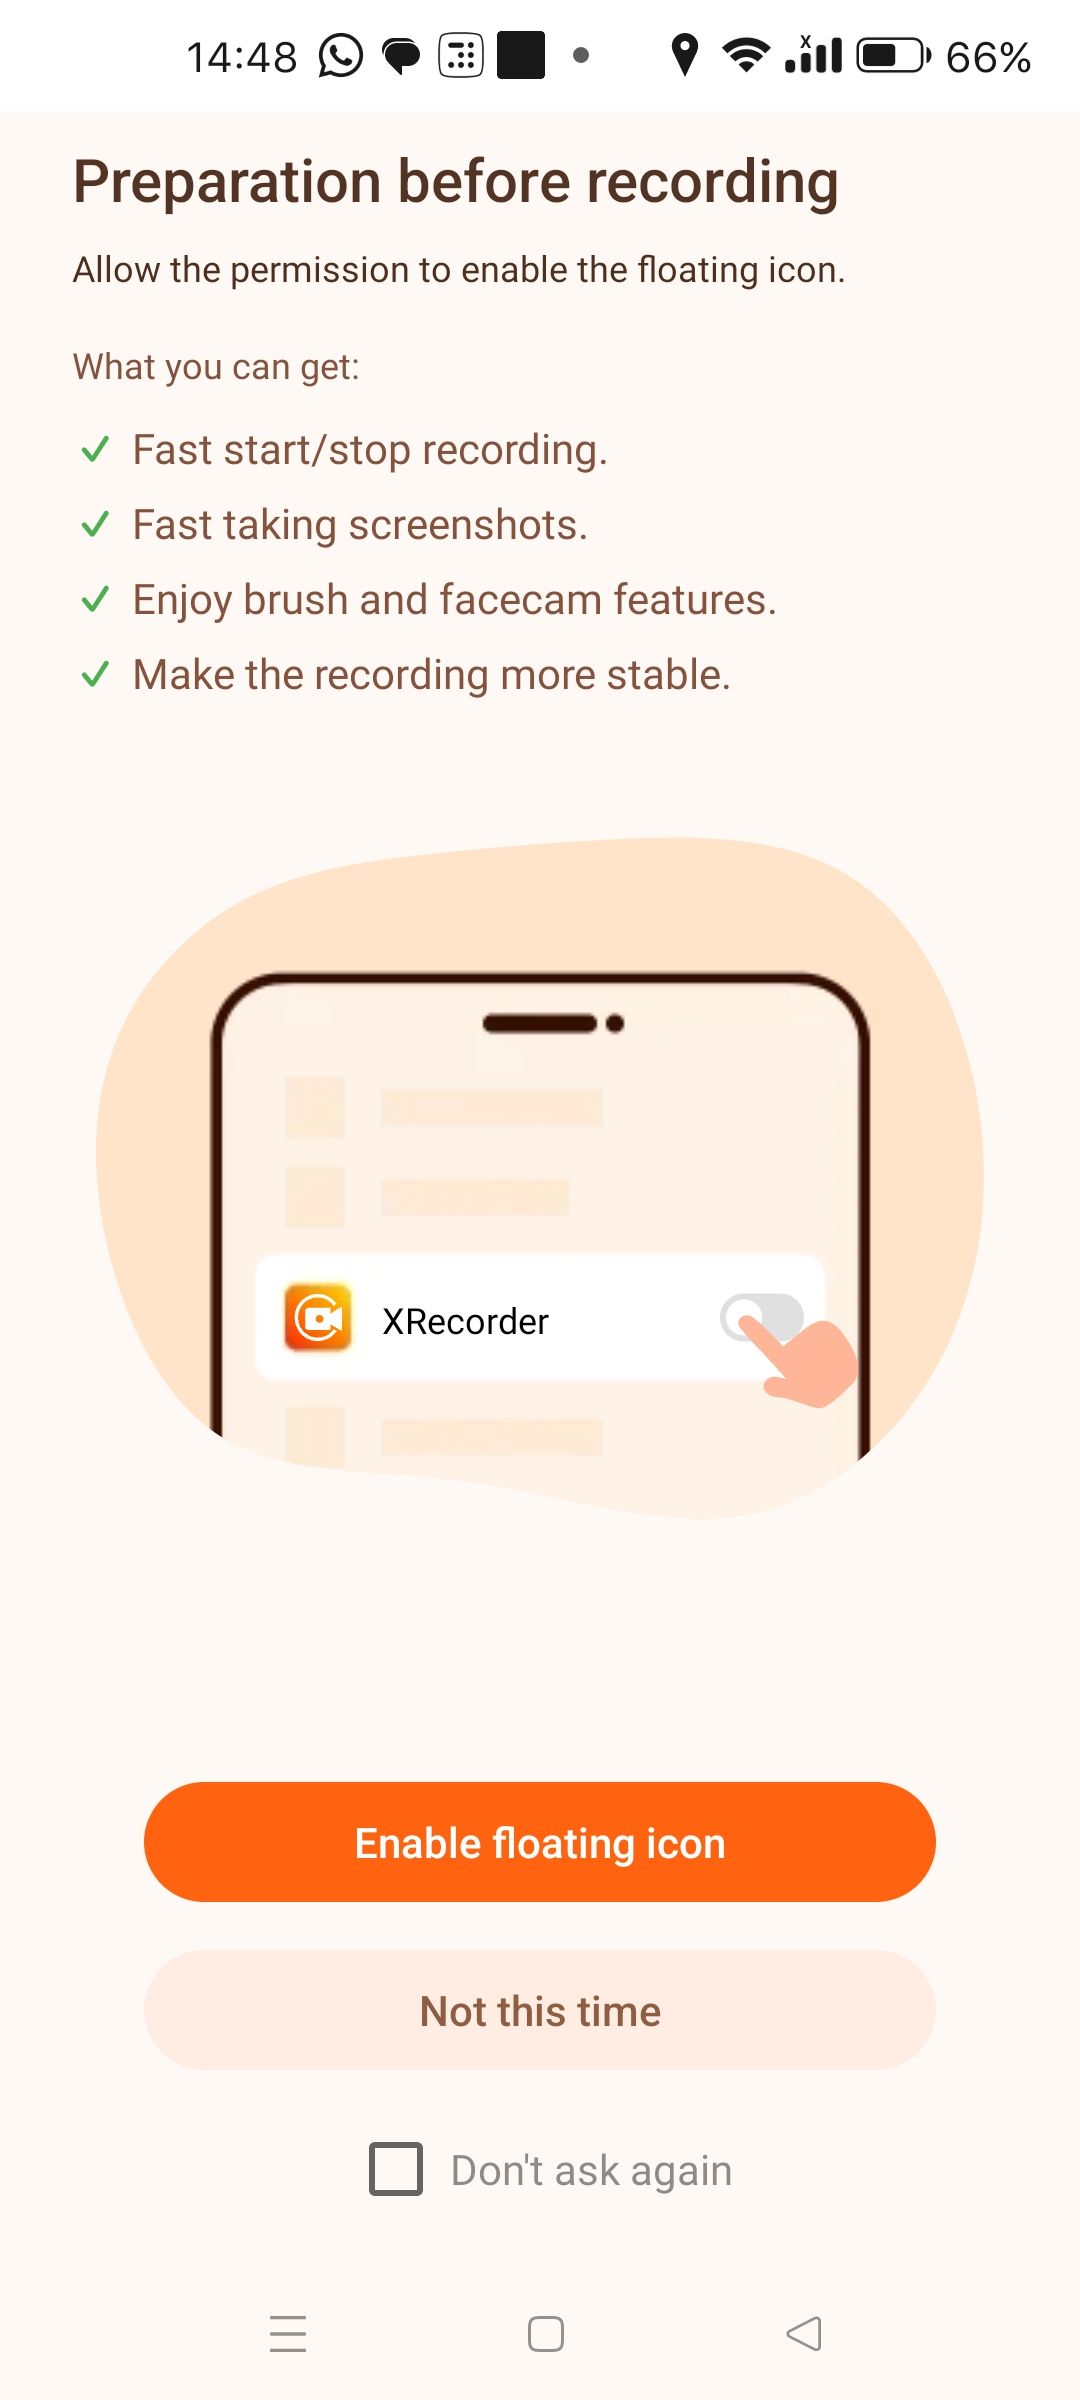 Enable Floating Icon in XRecorder